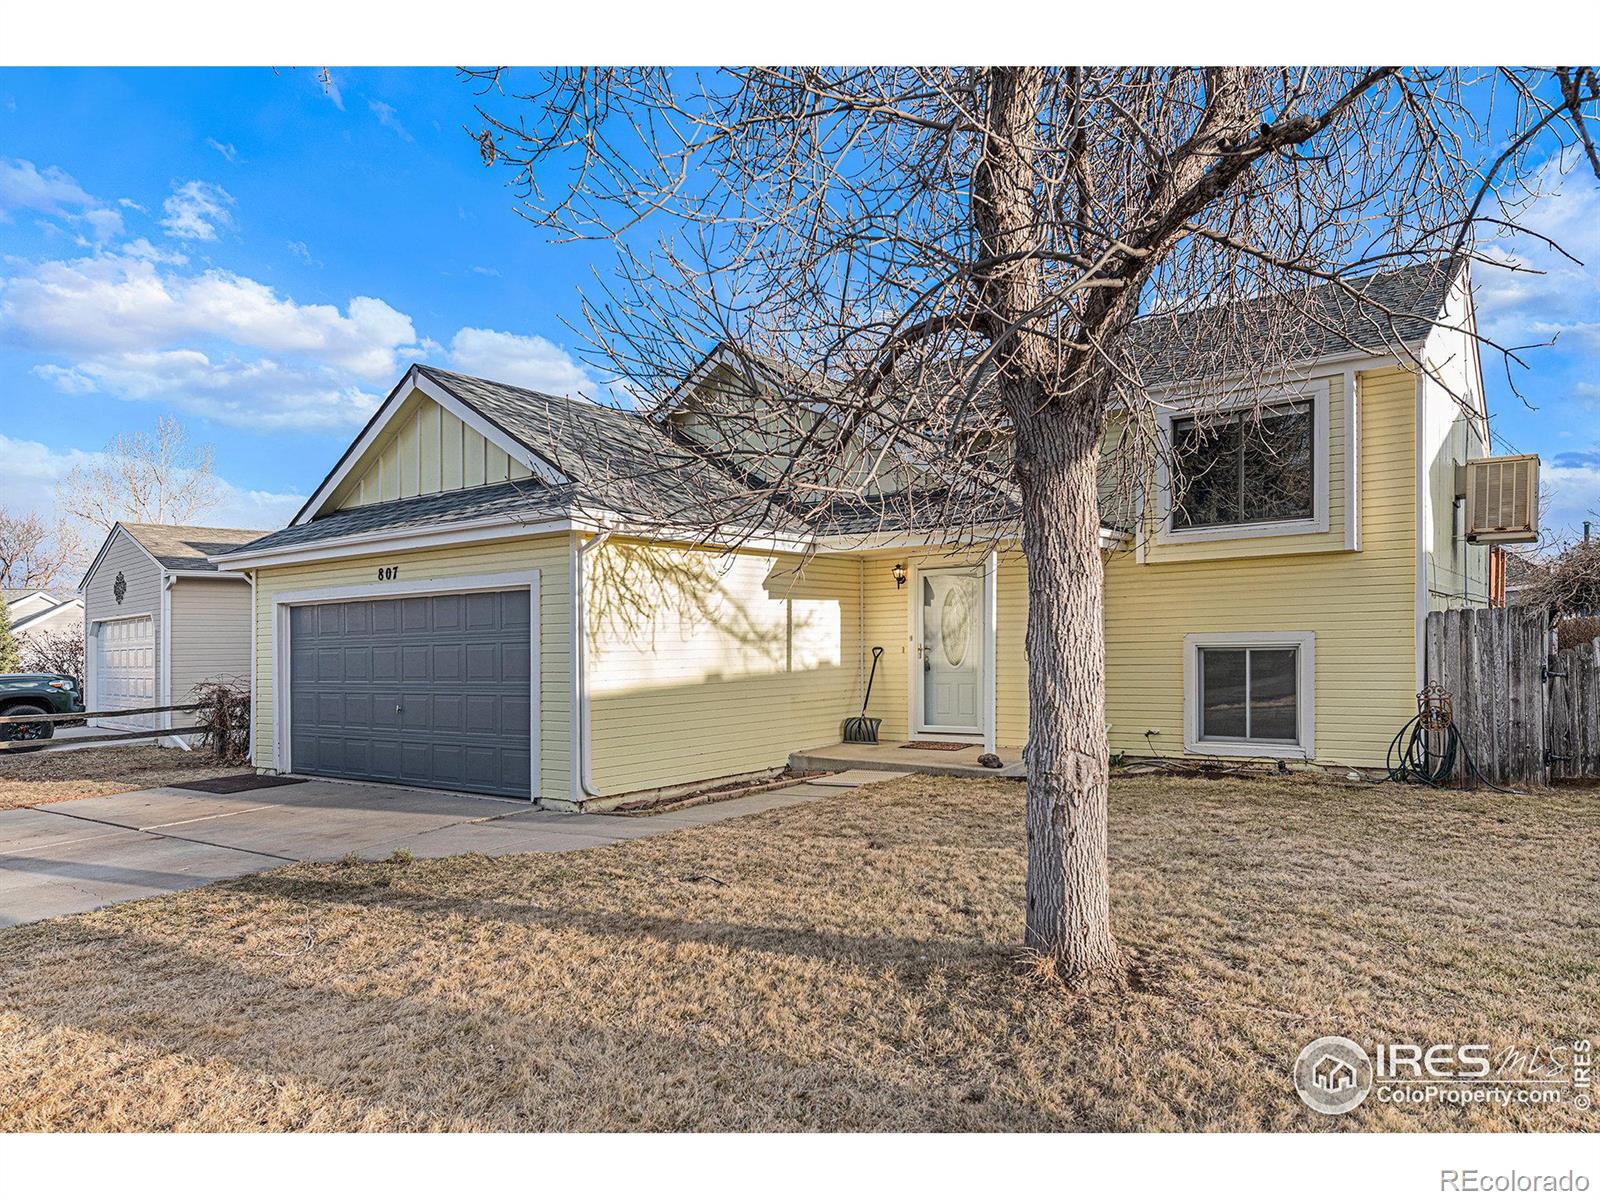 Report Image for 807  Bitterbrush Lane,Fort Collins, Colorado